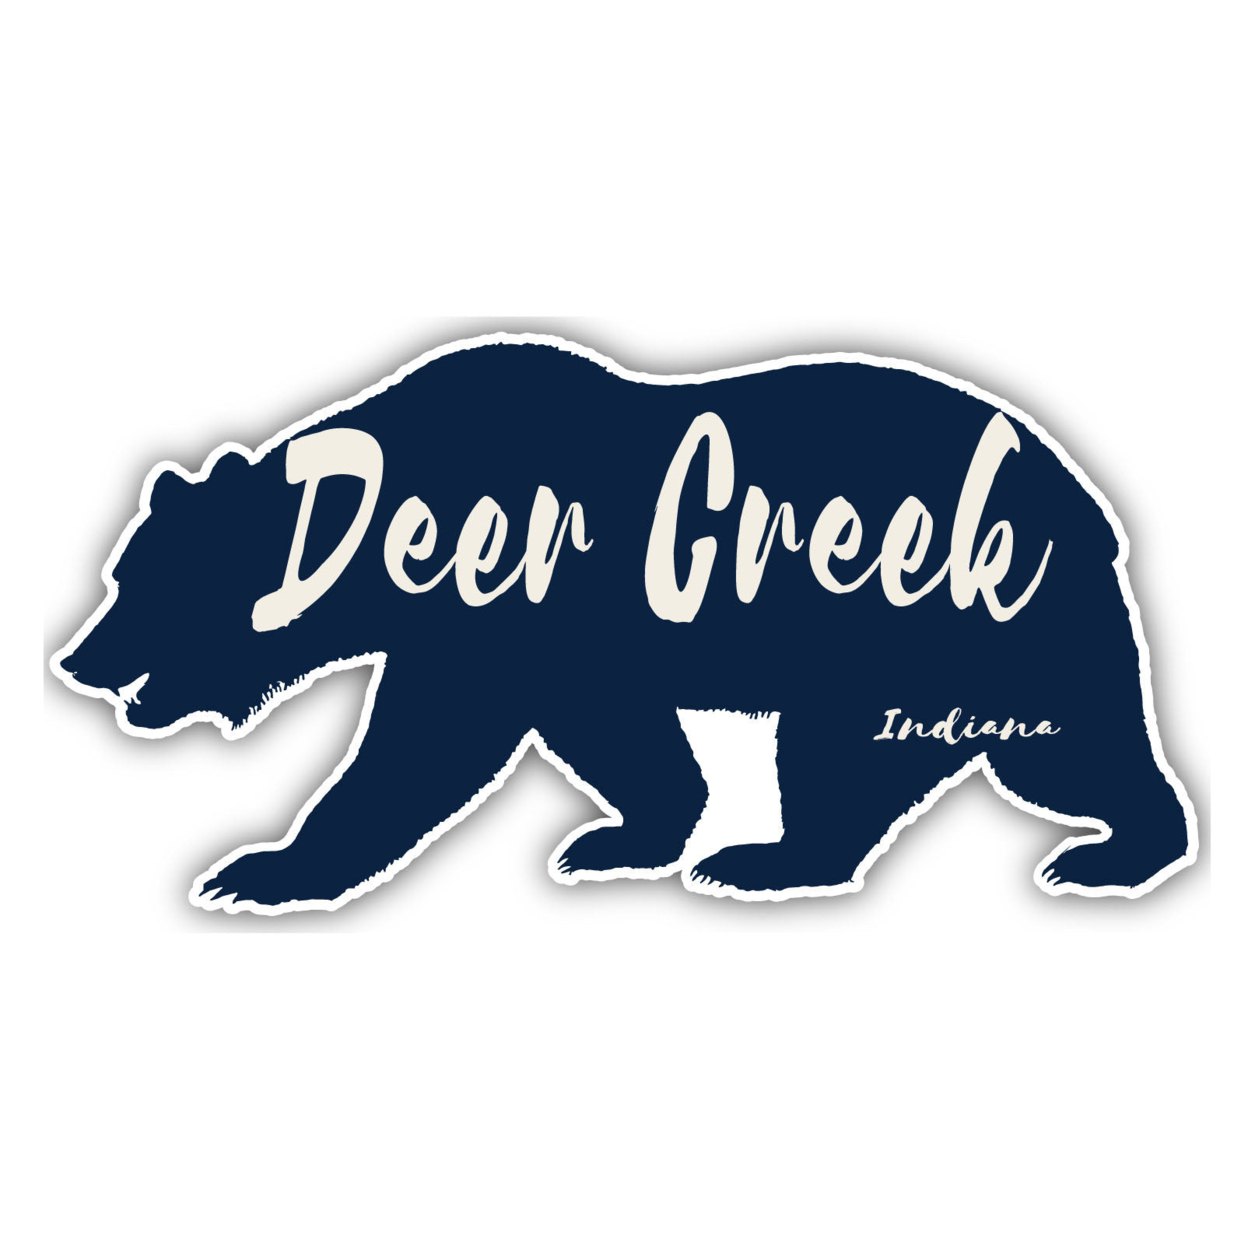 Deer Creek Indiana Souvenir Decorative Stickers (Choose Theme And Size) - 4-Pack, 12-Inch, Bear